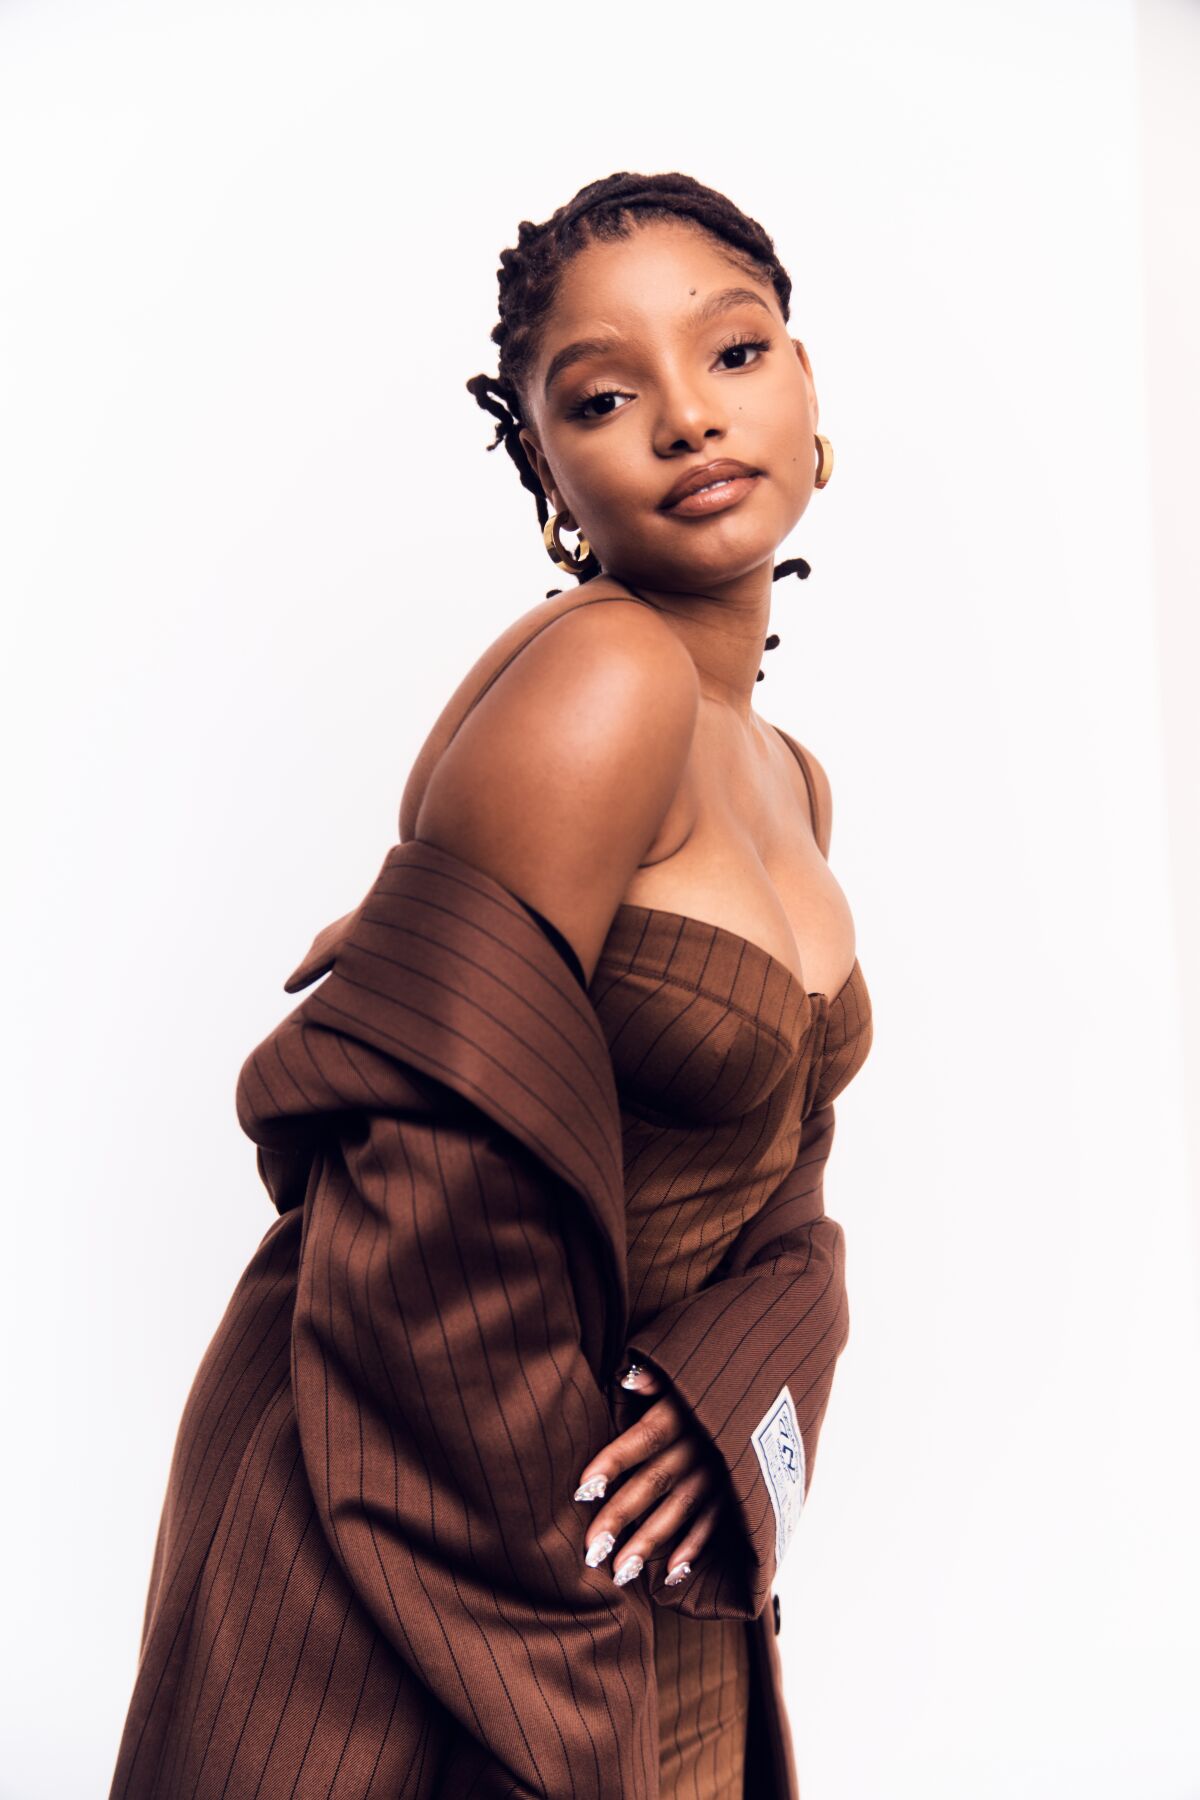 Halle Bailey posing for a portrait